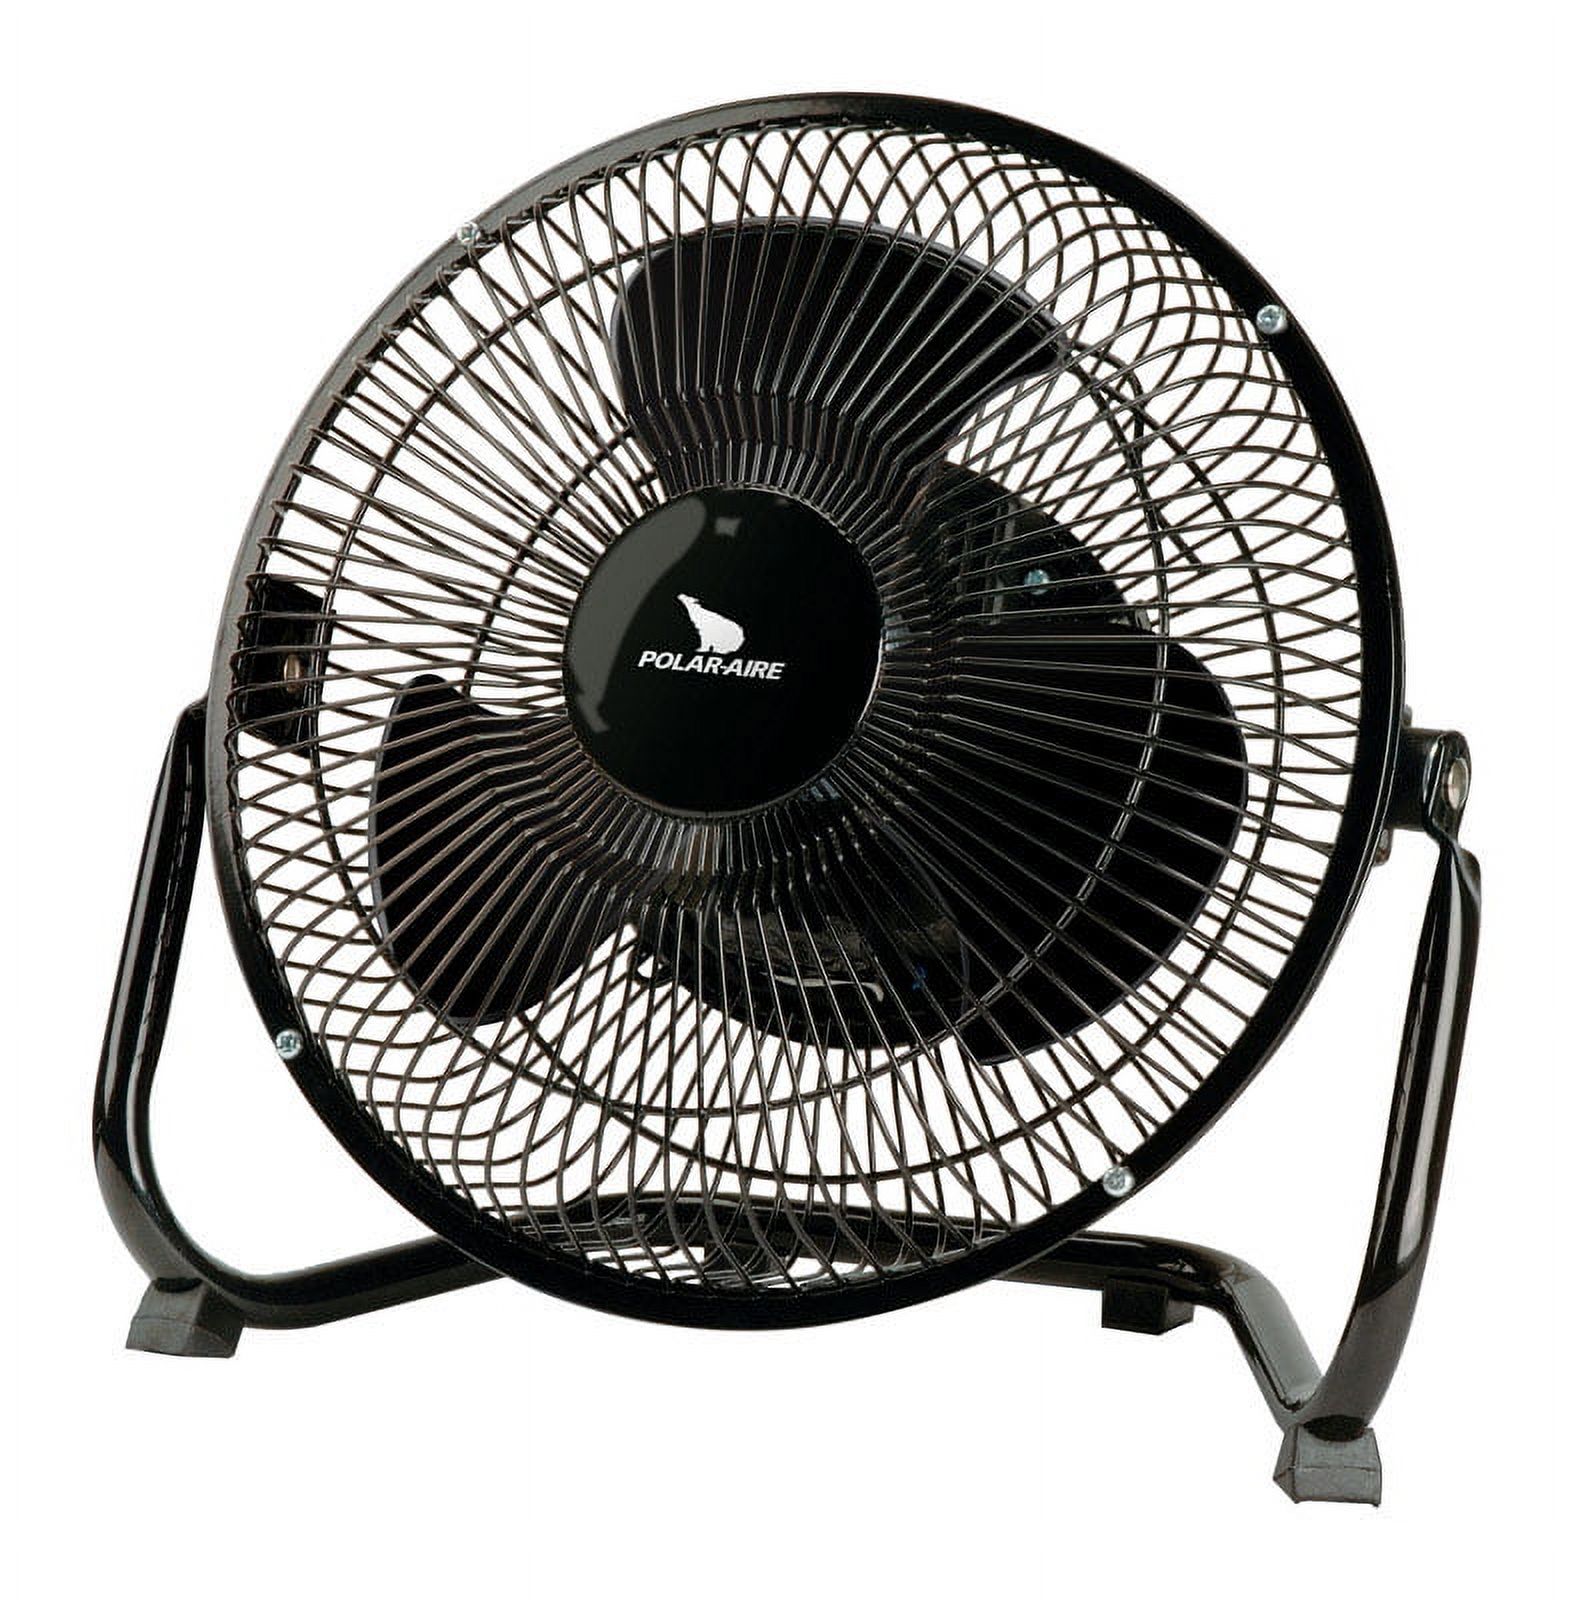 Polar-Aire Fans 8" 3 Speed Table Fans With VF-8PB, Black - image 1 of 2